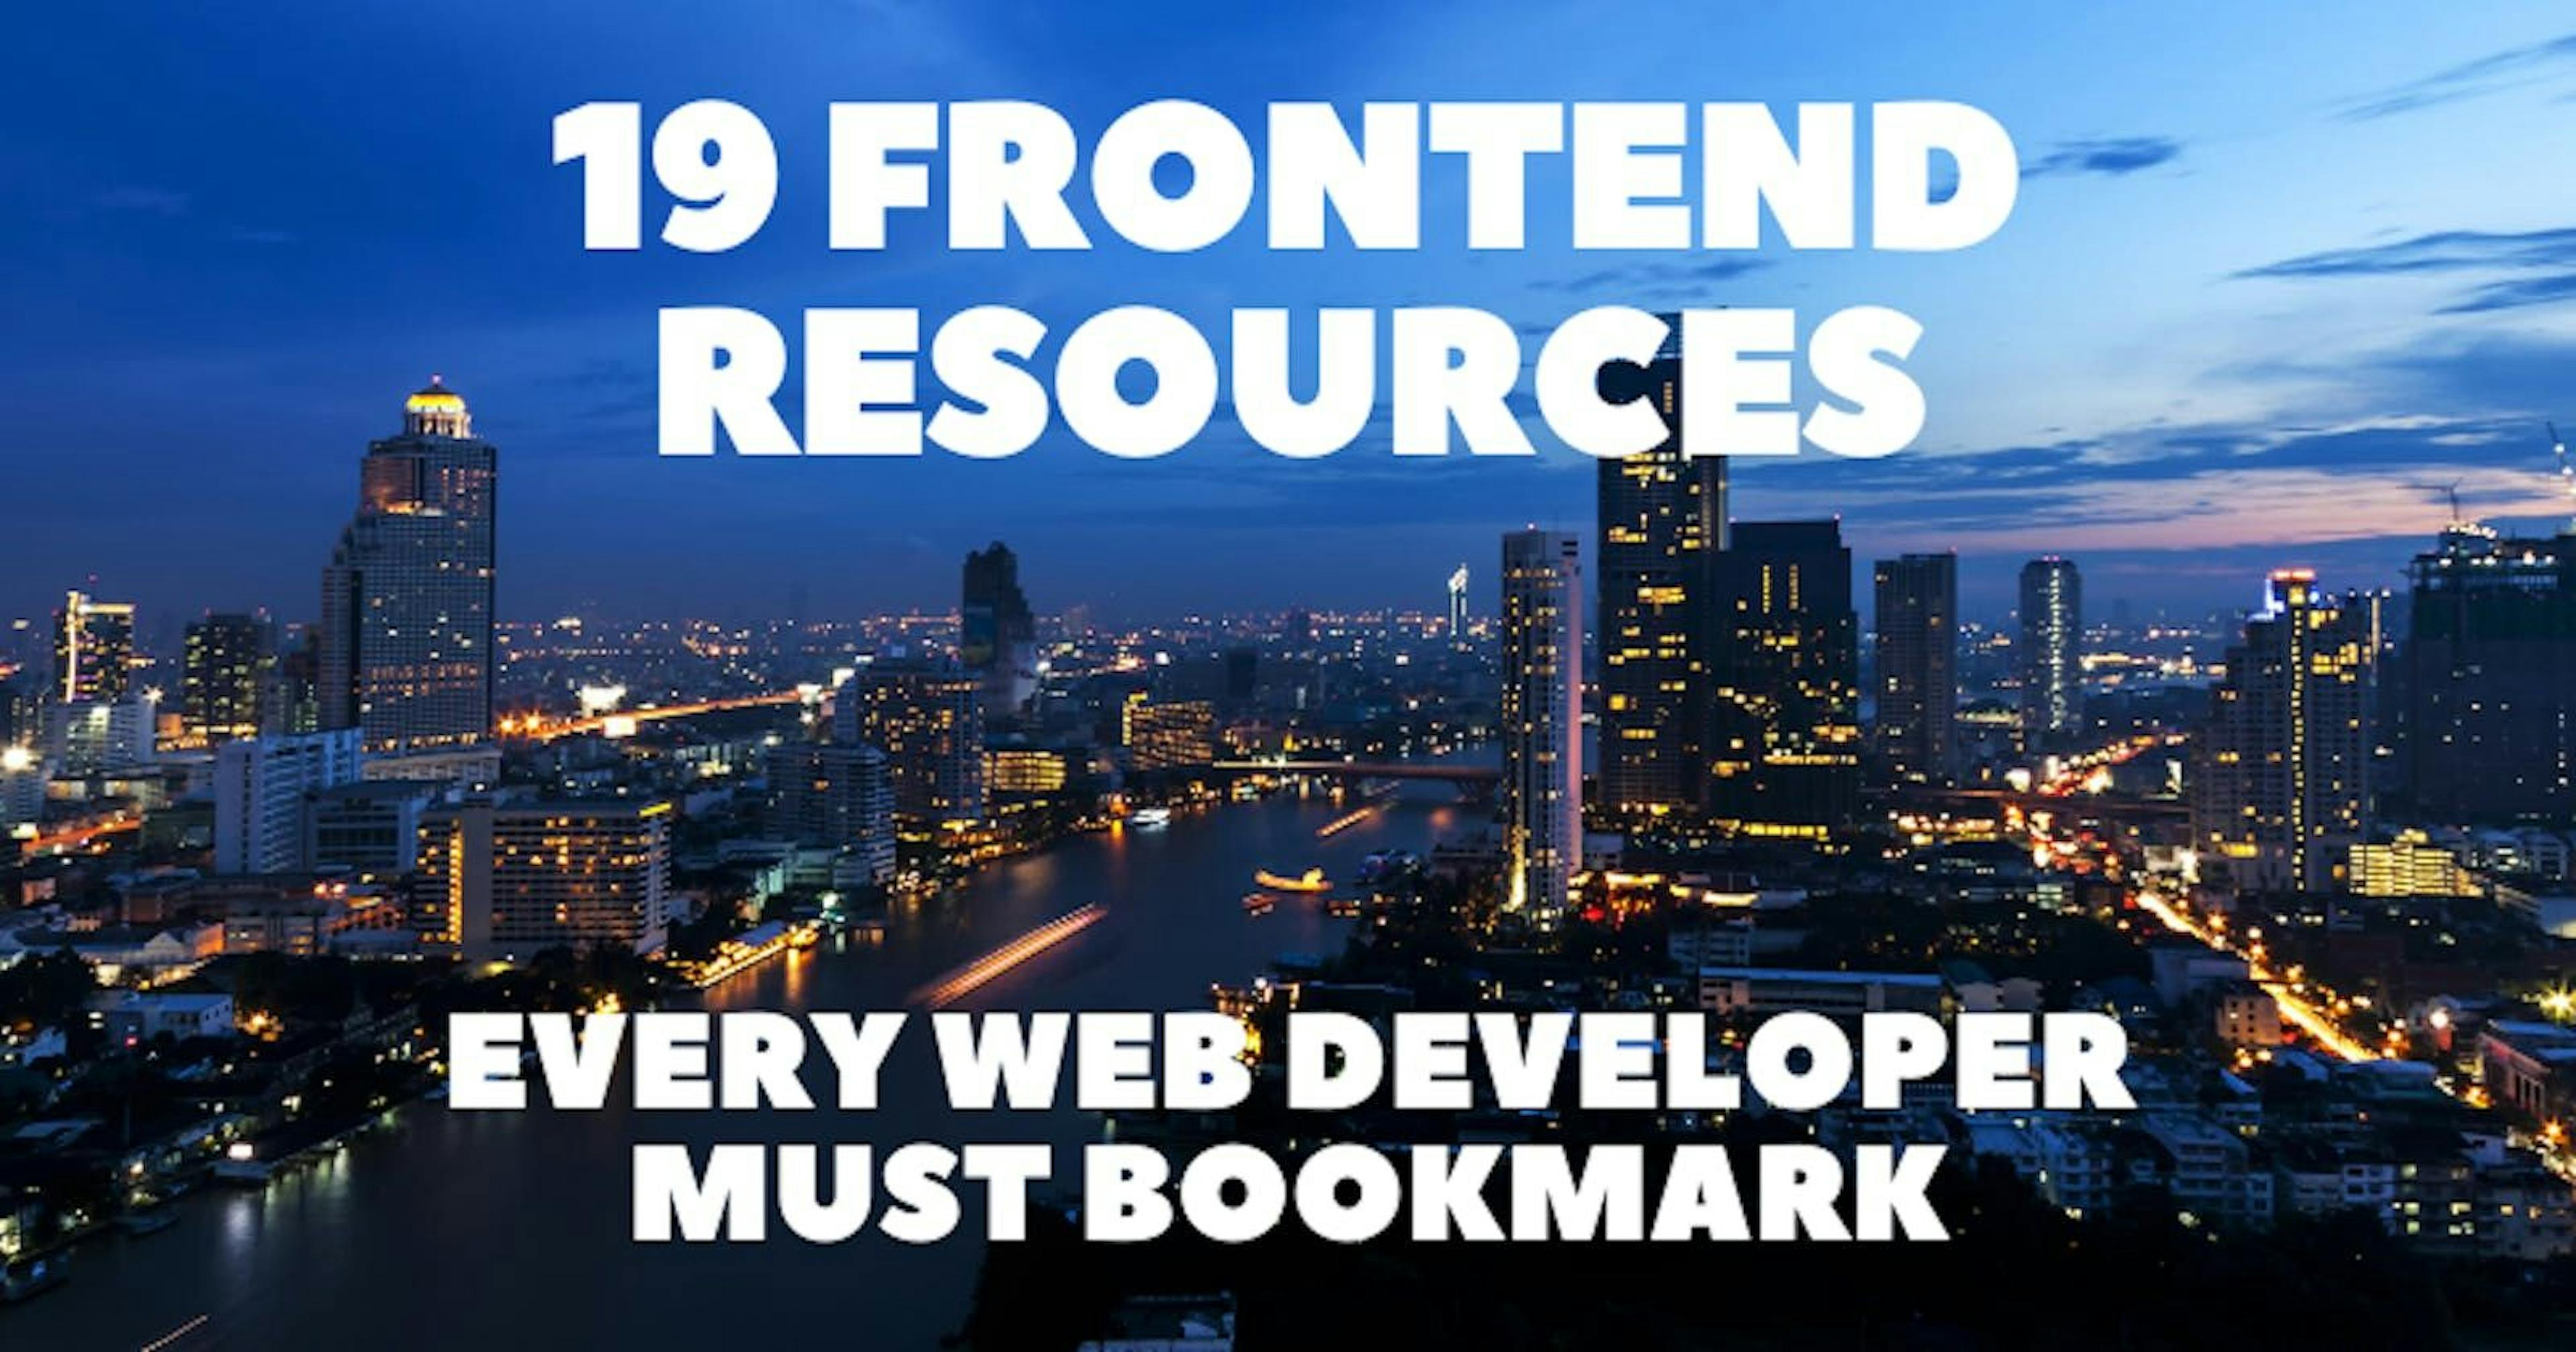 /web-devs-bookmark-these-19-frontend-resources feature image